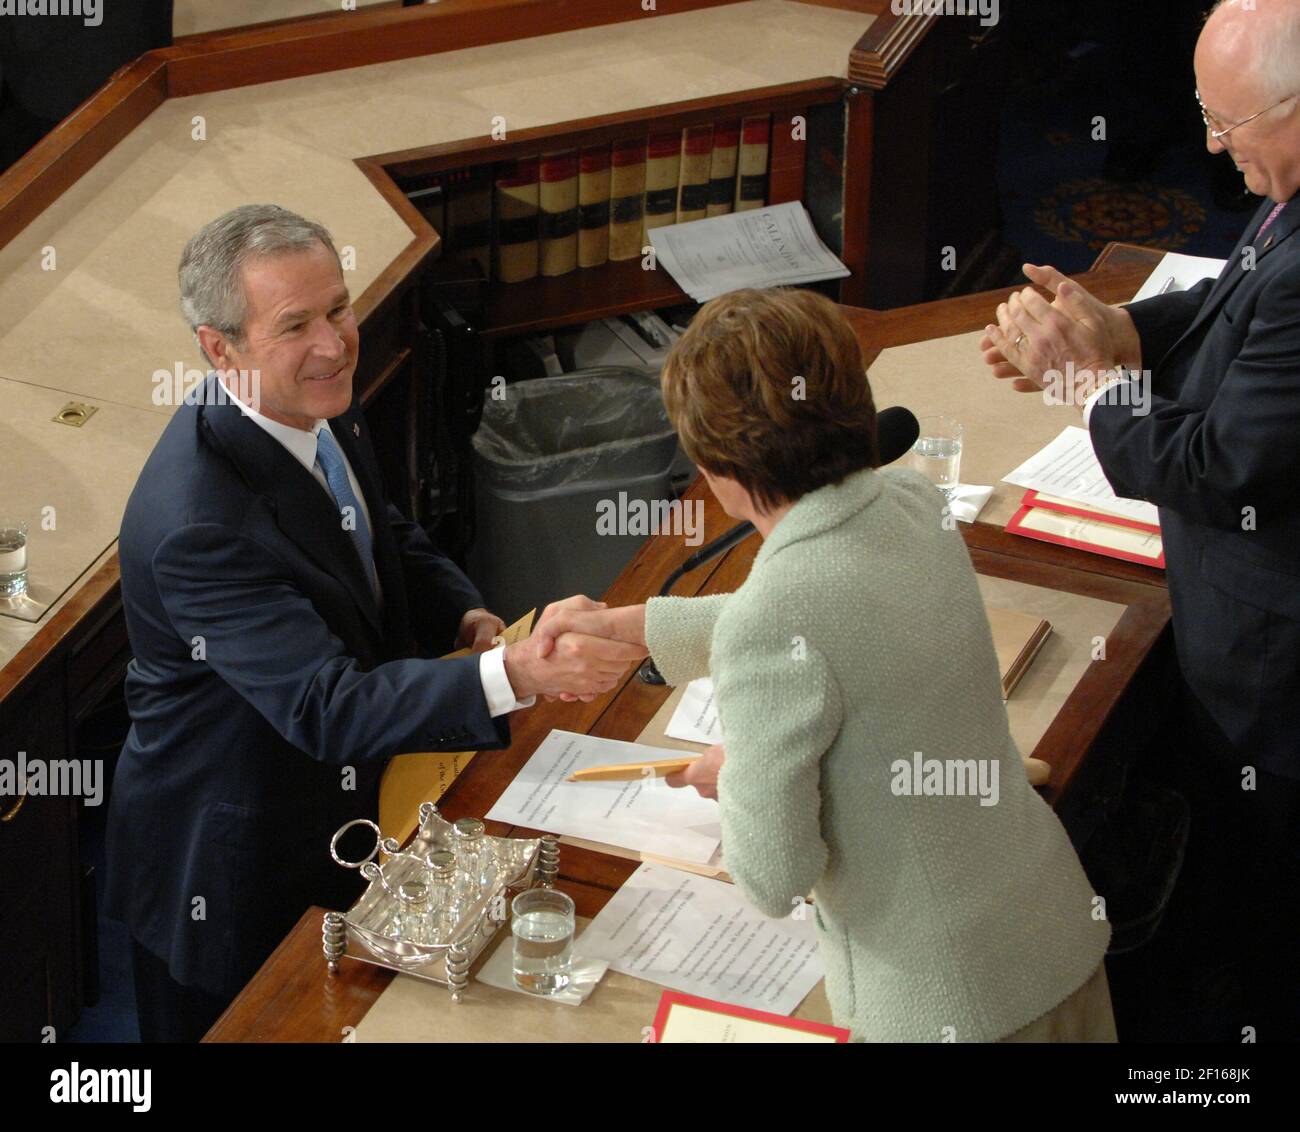 U.S. President George W. Bush shakes hands with Speaker of the House Nancy Pelosi (D-CA) as he arrives to deliver his State of the Union address to a joint session of Congress in the House of Representatives Chamber on Tuesday, January 23, 2007. (Photo by George Bridges/MCT/Sipa USA) Stock Photo